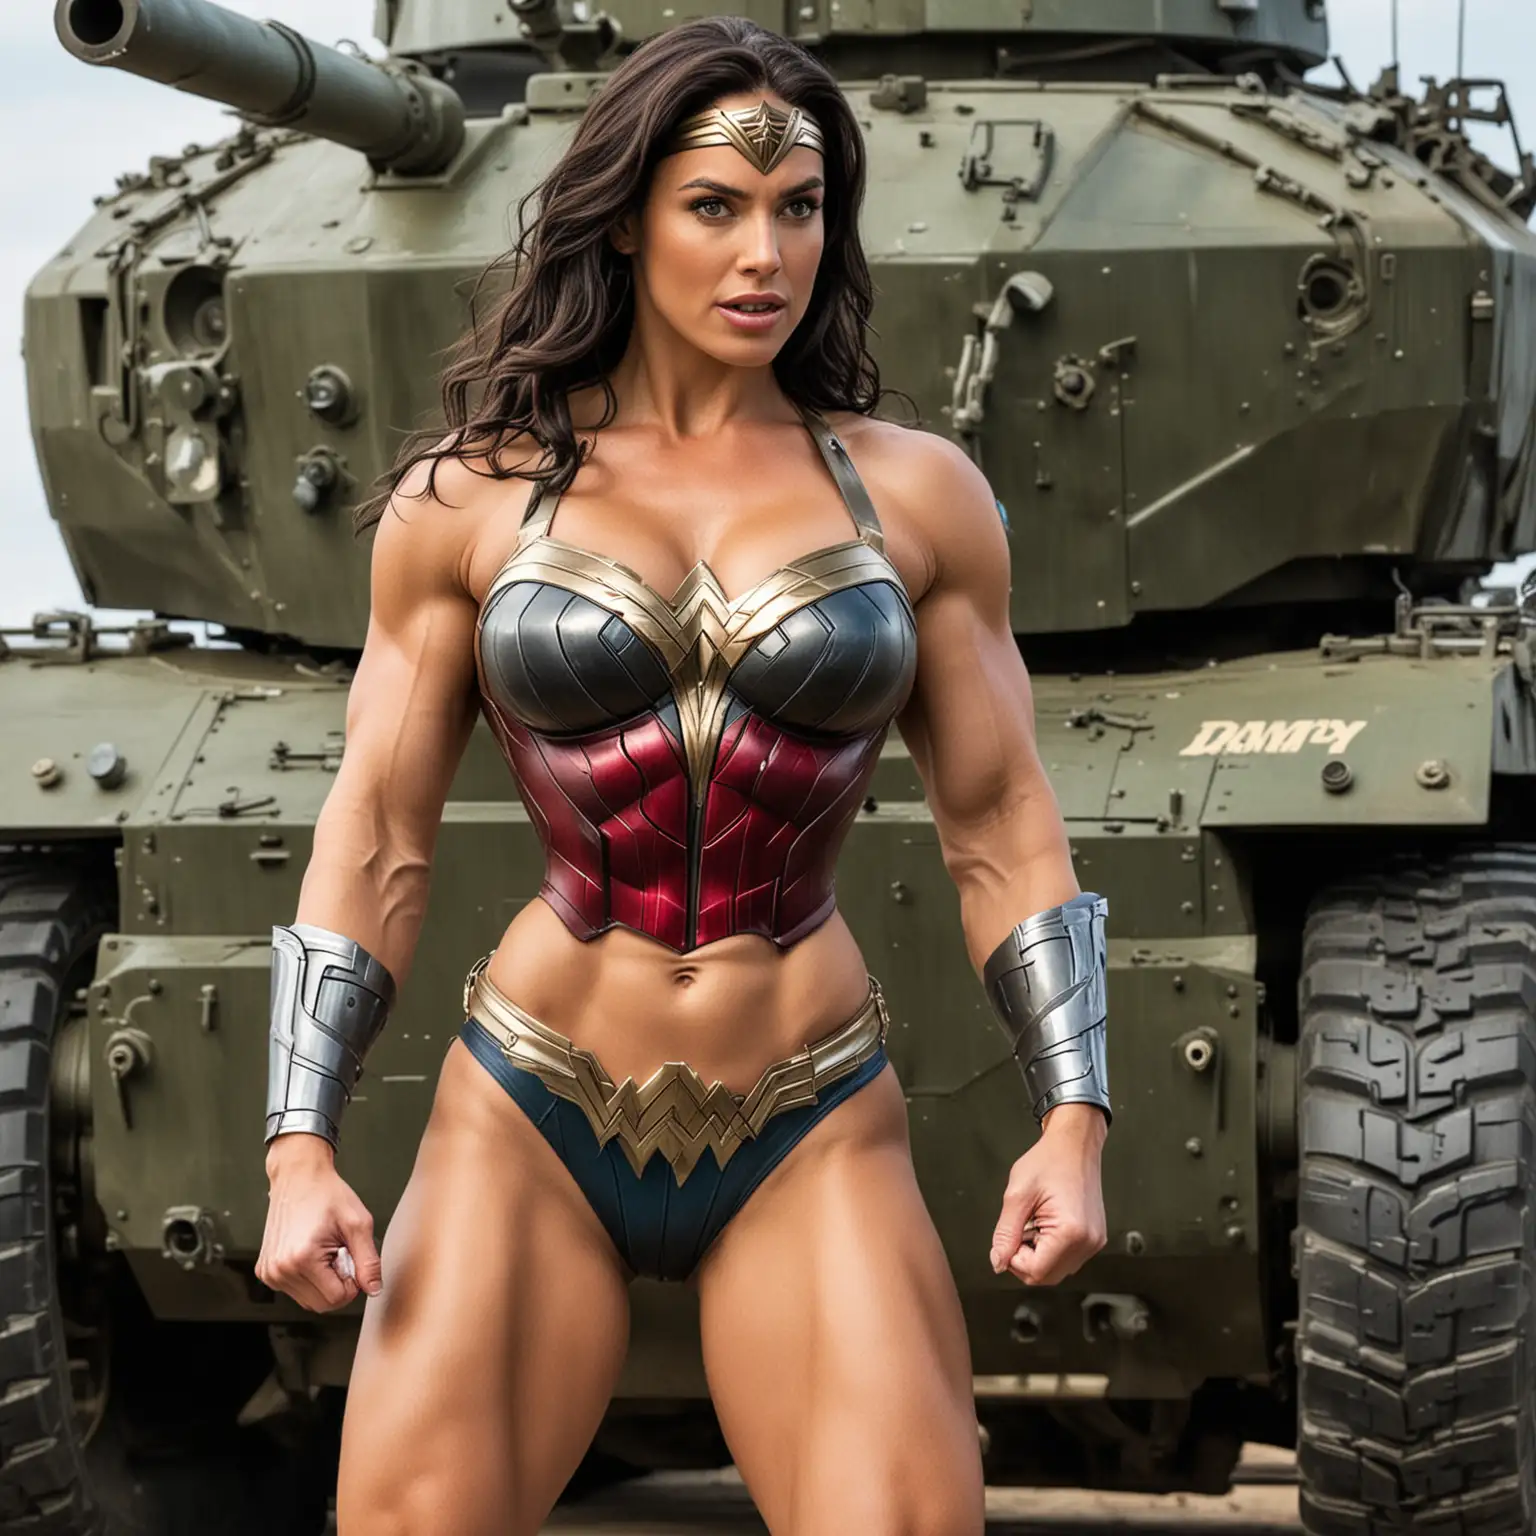 Very muscular wonder woman witth huge breasts , six pack abs, and bulging biceps wearing a bikini while lifting up an army tank